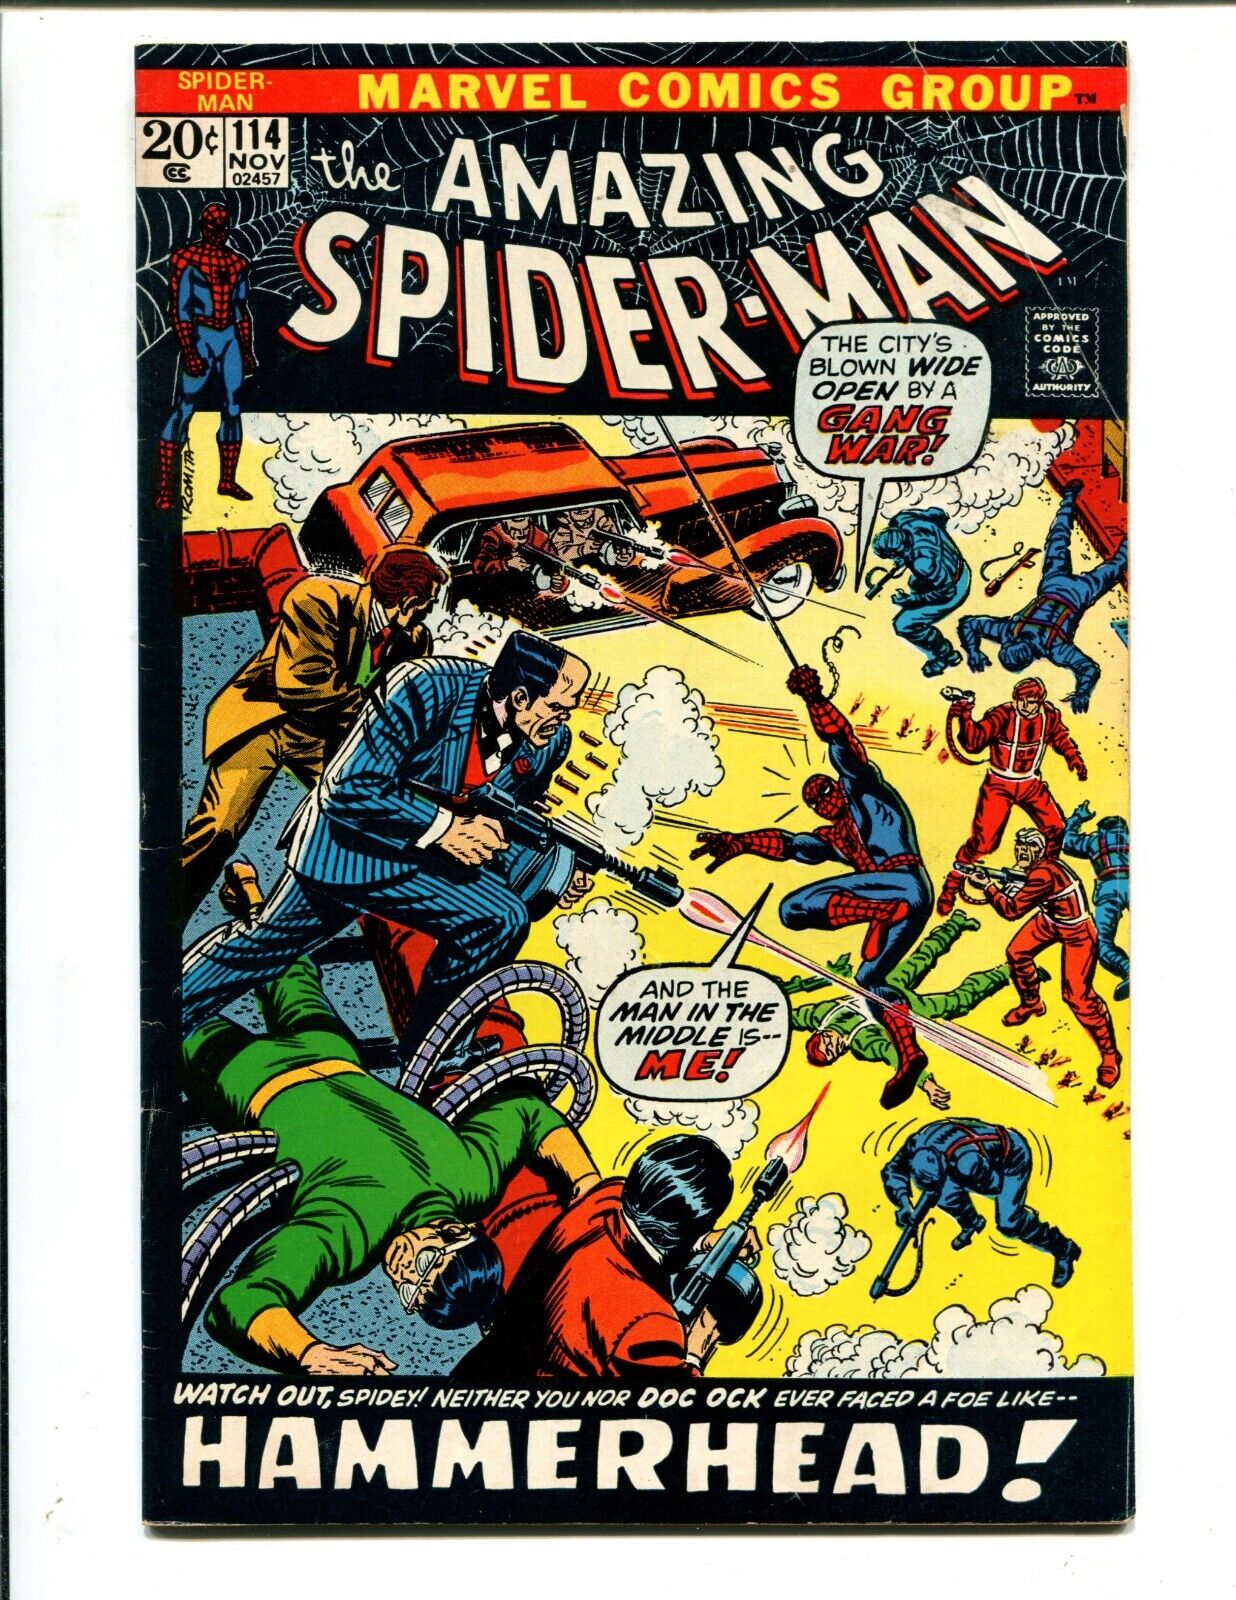 The Amazing Spider-Man #114 - Conway, Romita Sr. (4.5) 1972 - COMBINED SHIPPING